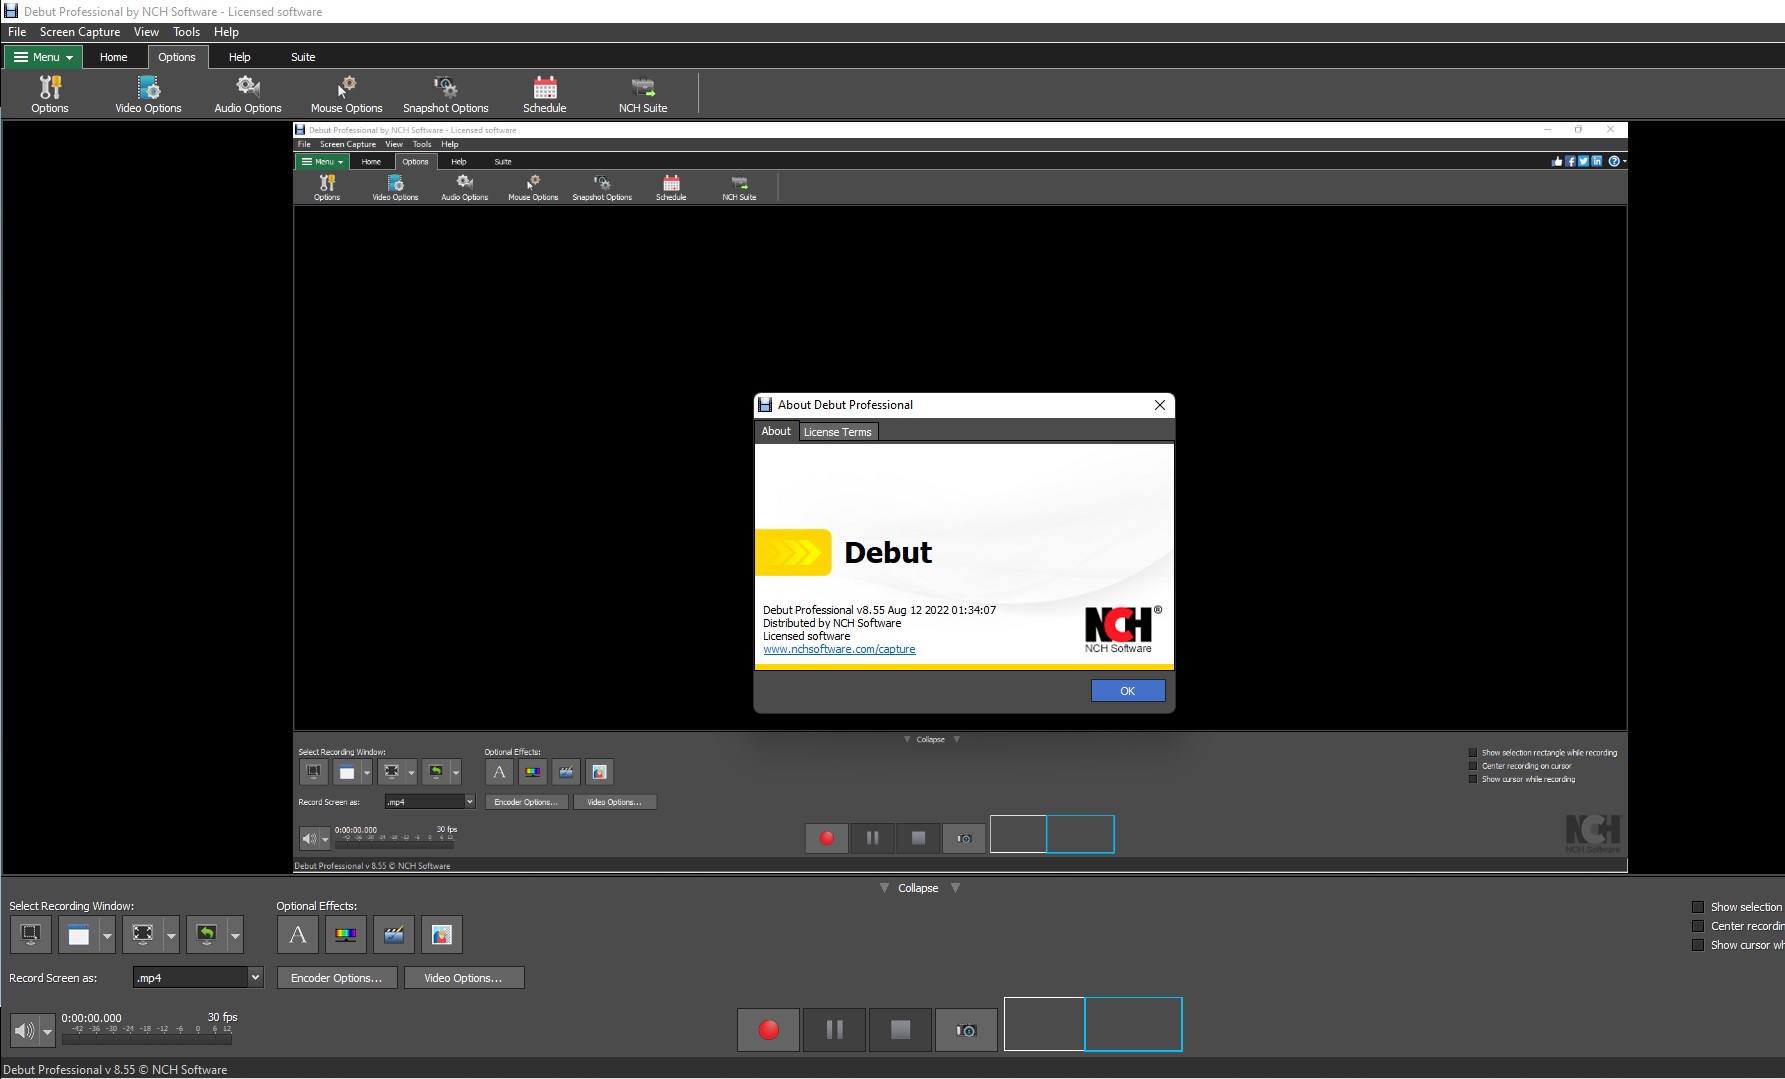 What’s new in Debut Video Capture Pro?